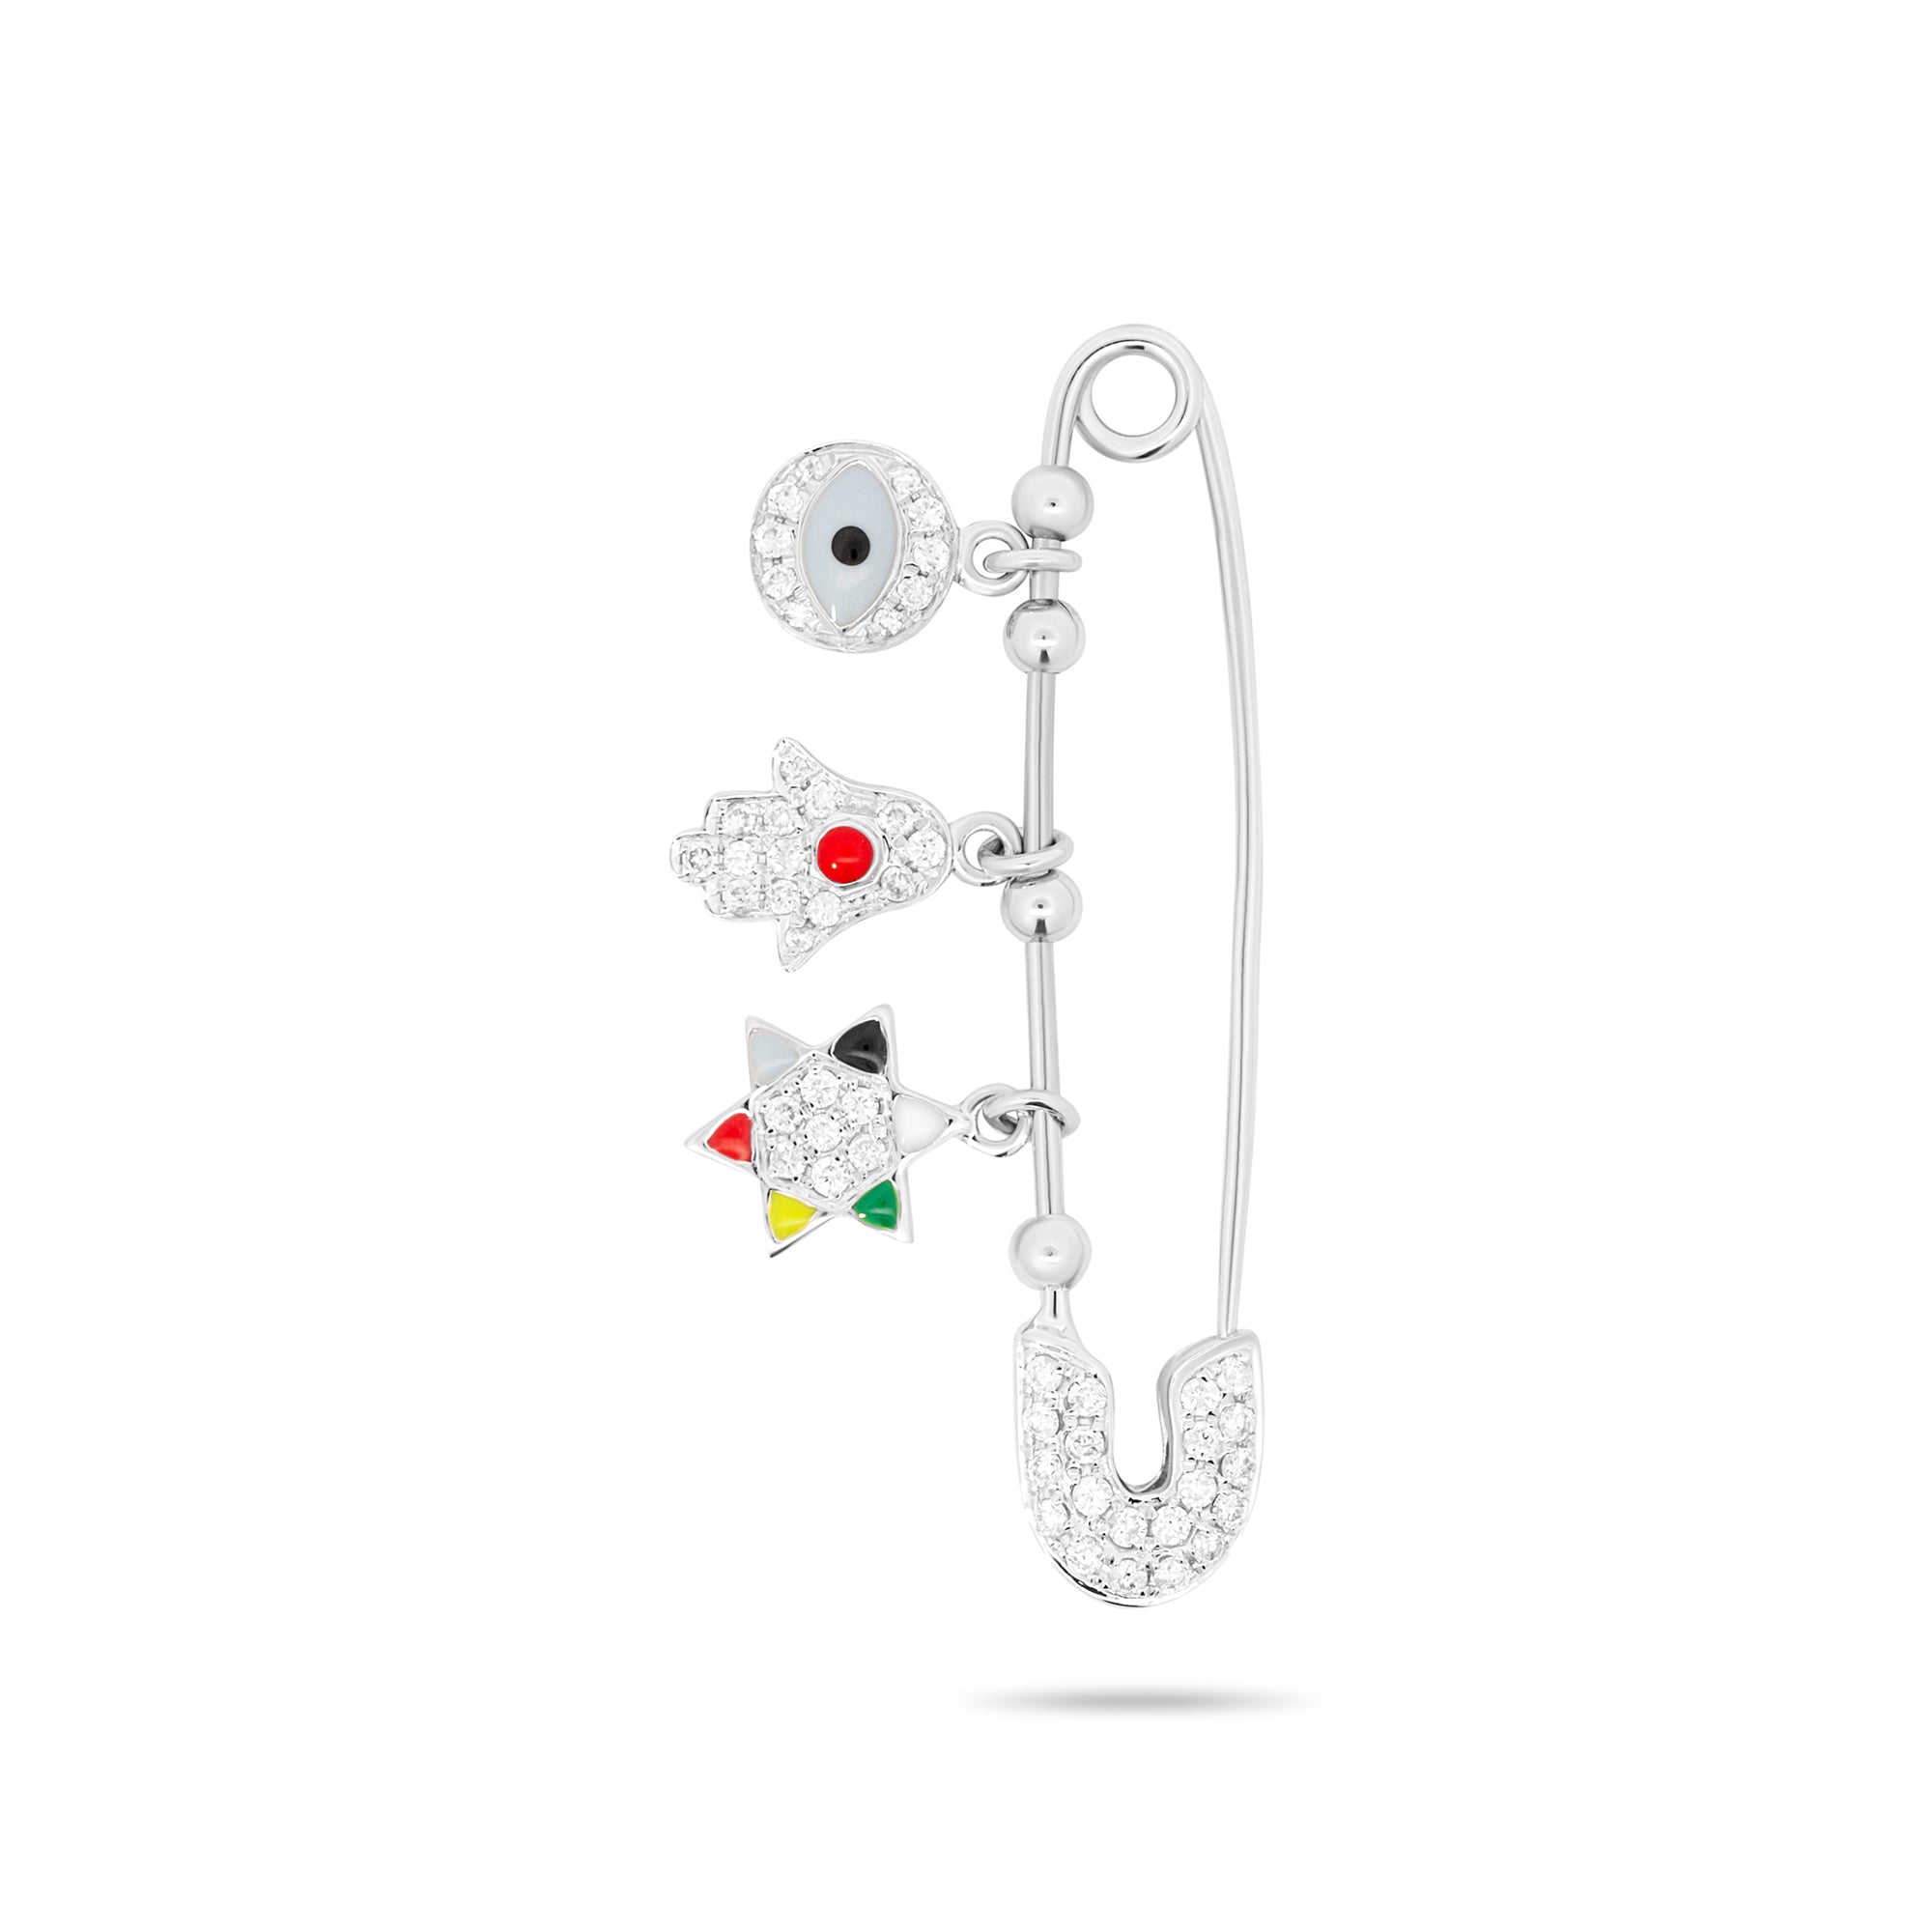 Charm Safety Pin Pendant